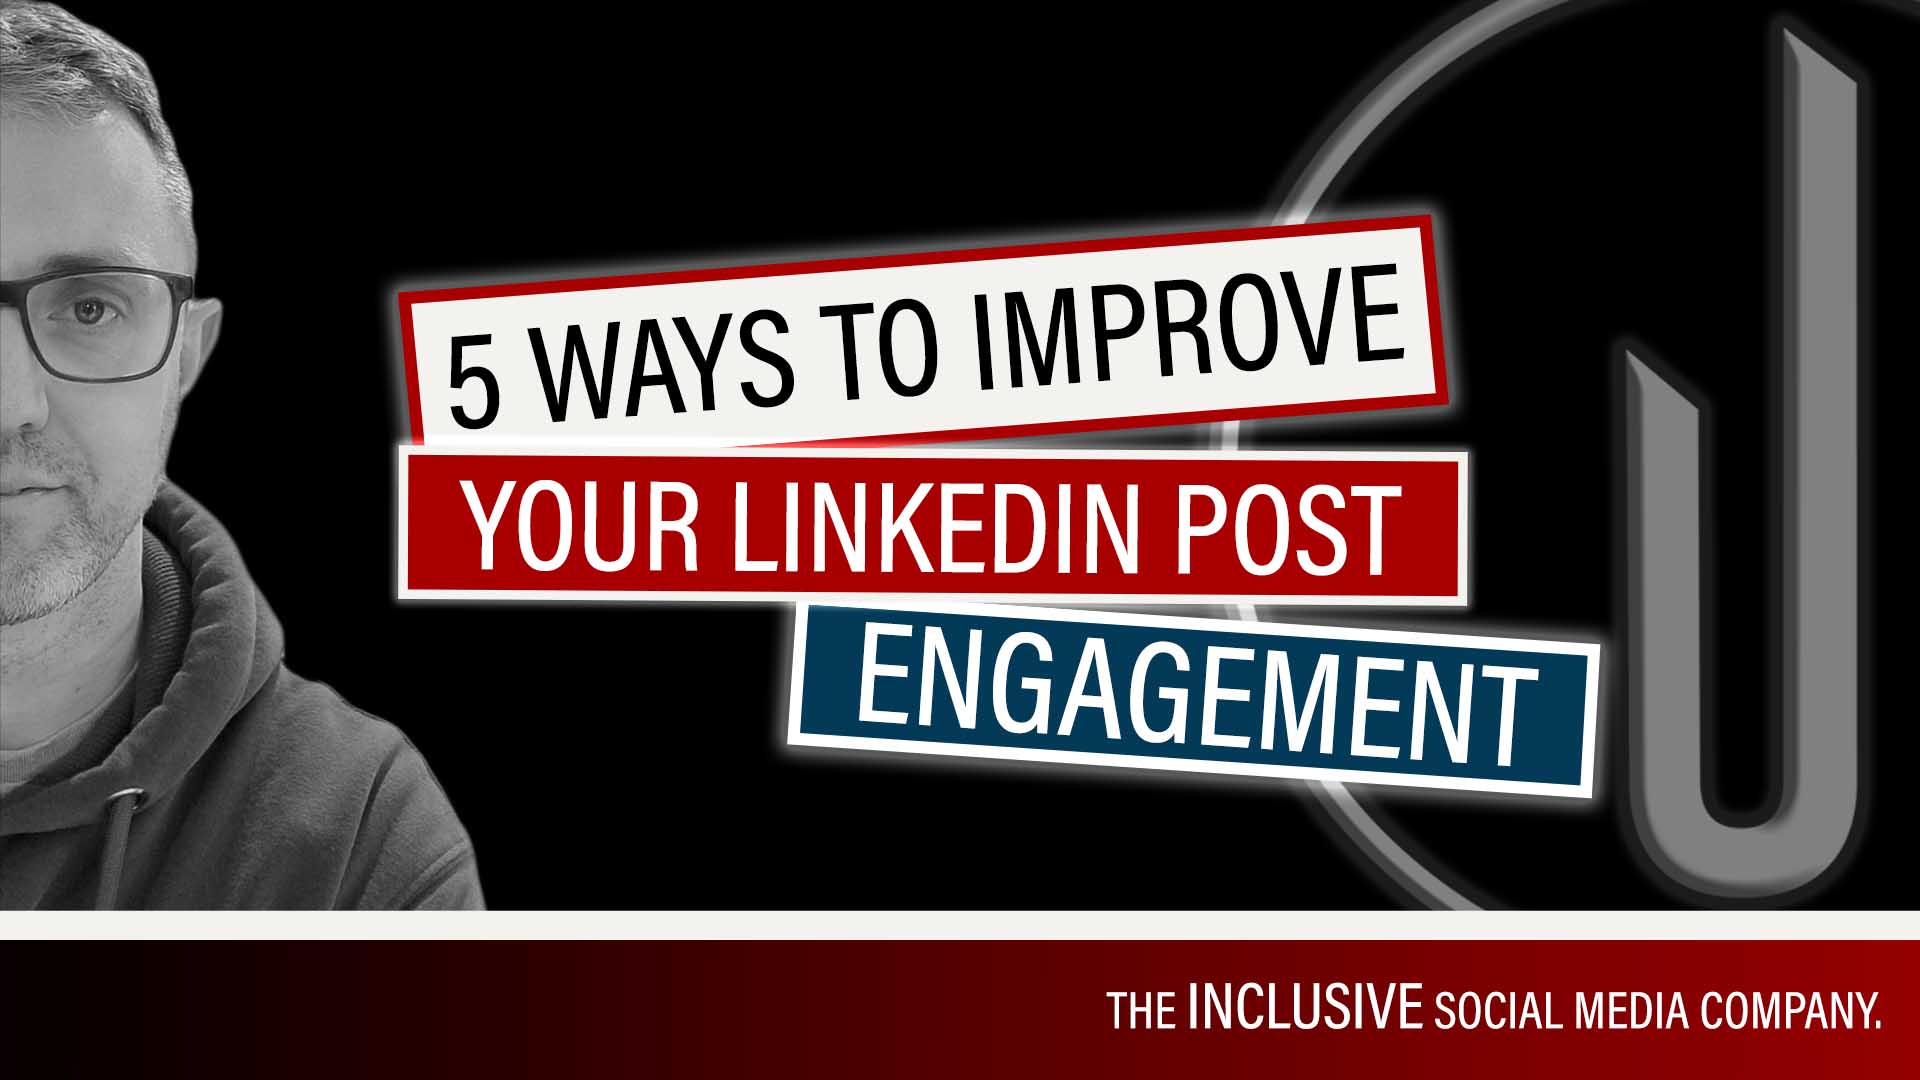 5 ways to improve your Linkedin post engagement